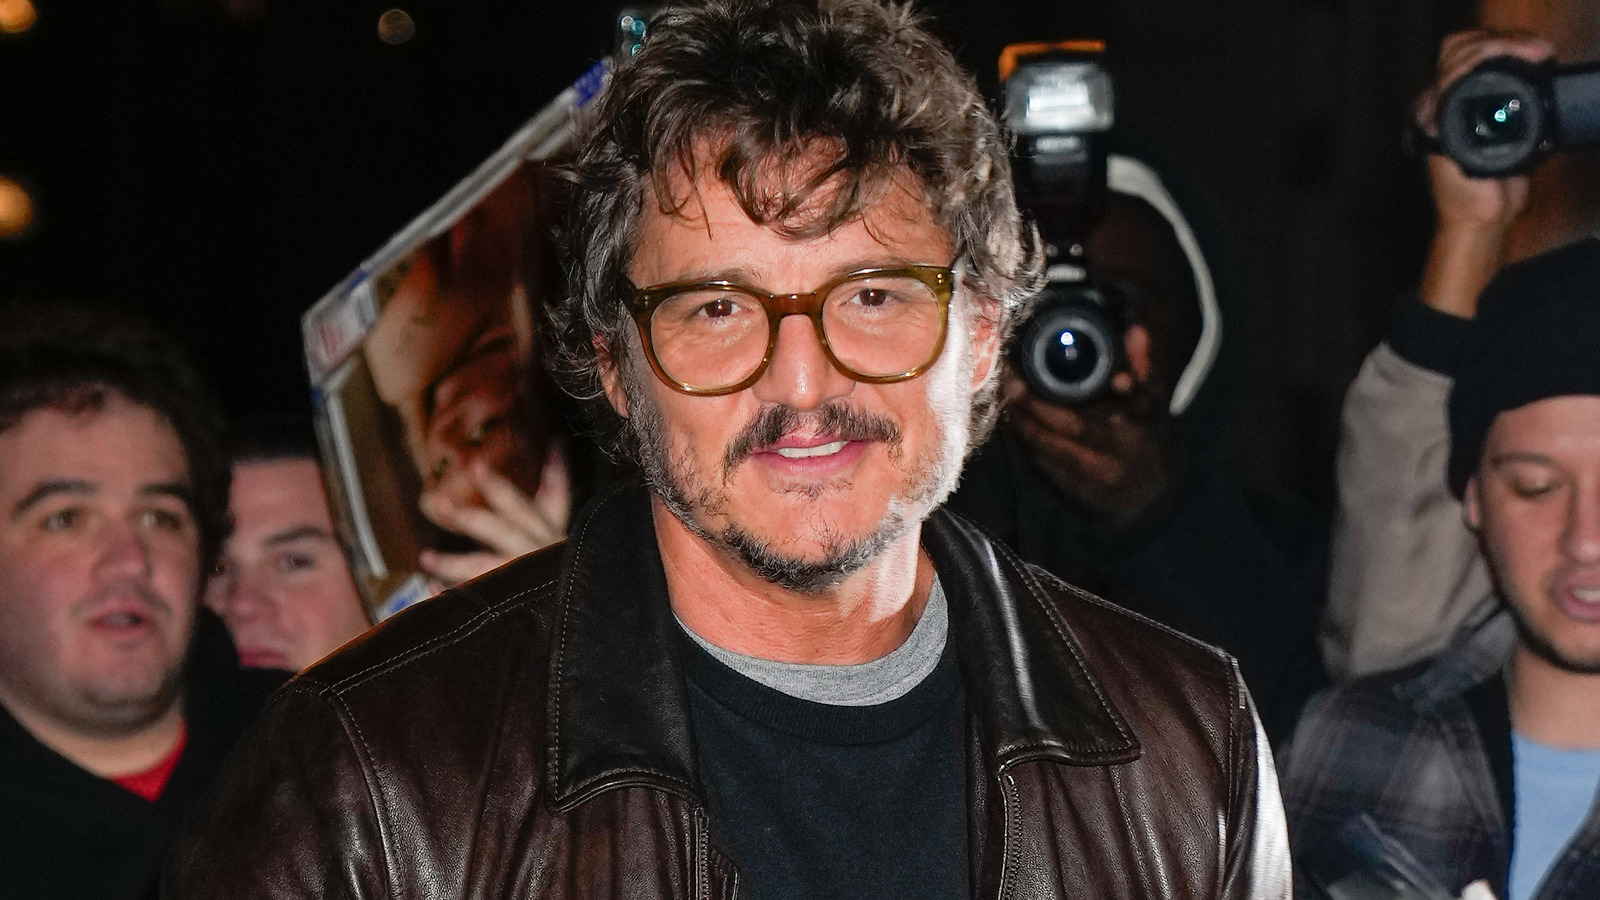 Pedro Pascal Eyed for Mr. Fantastic Role in 'Fantastic Four' Movie